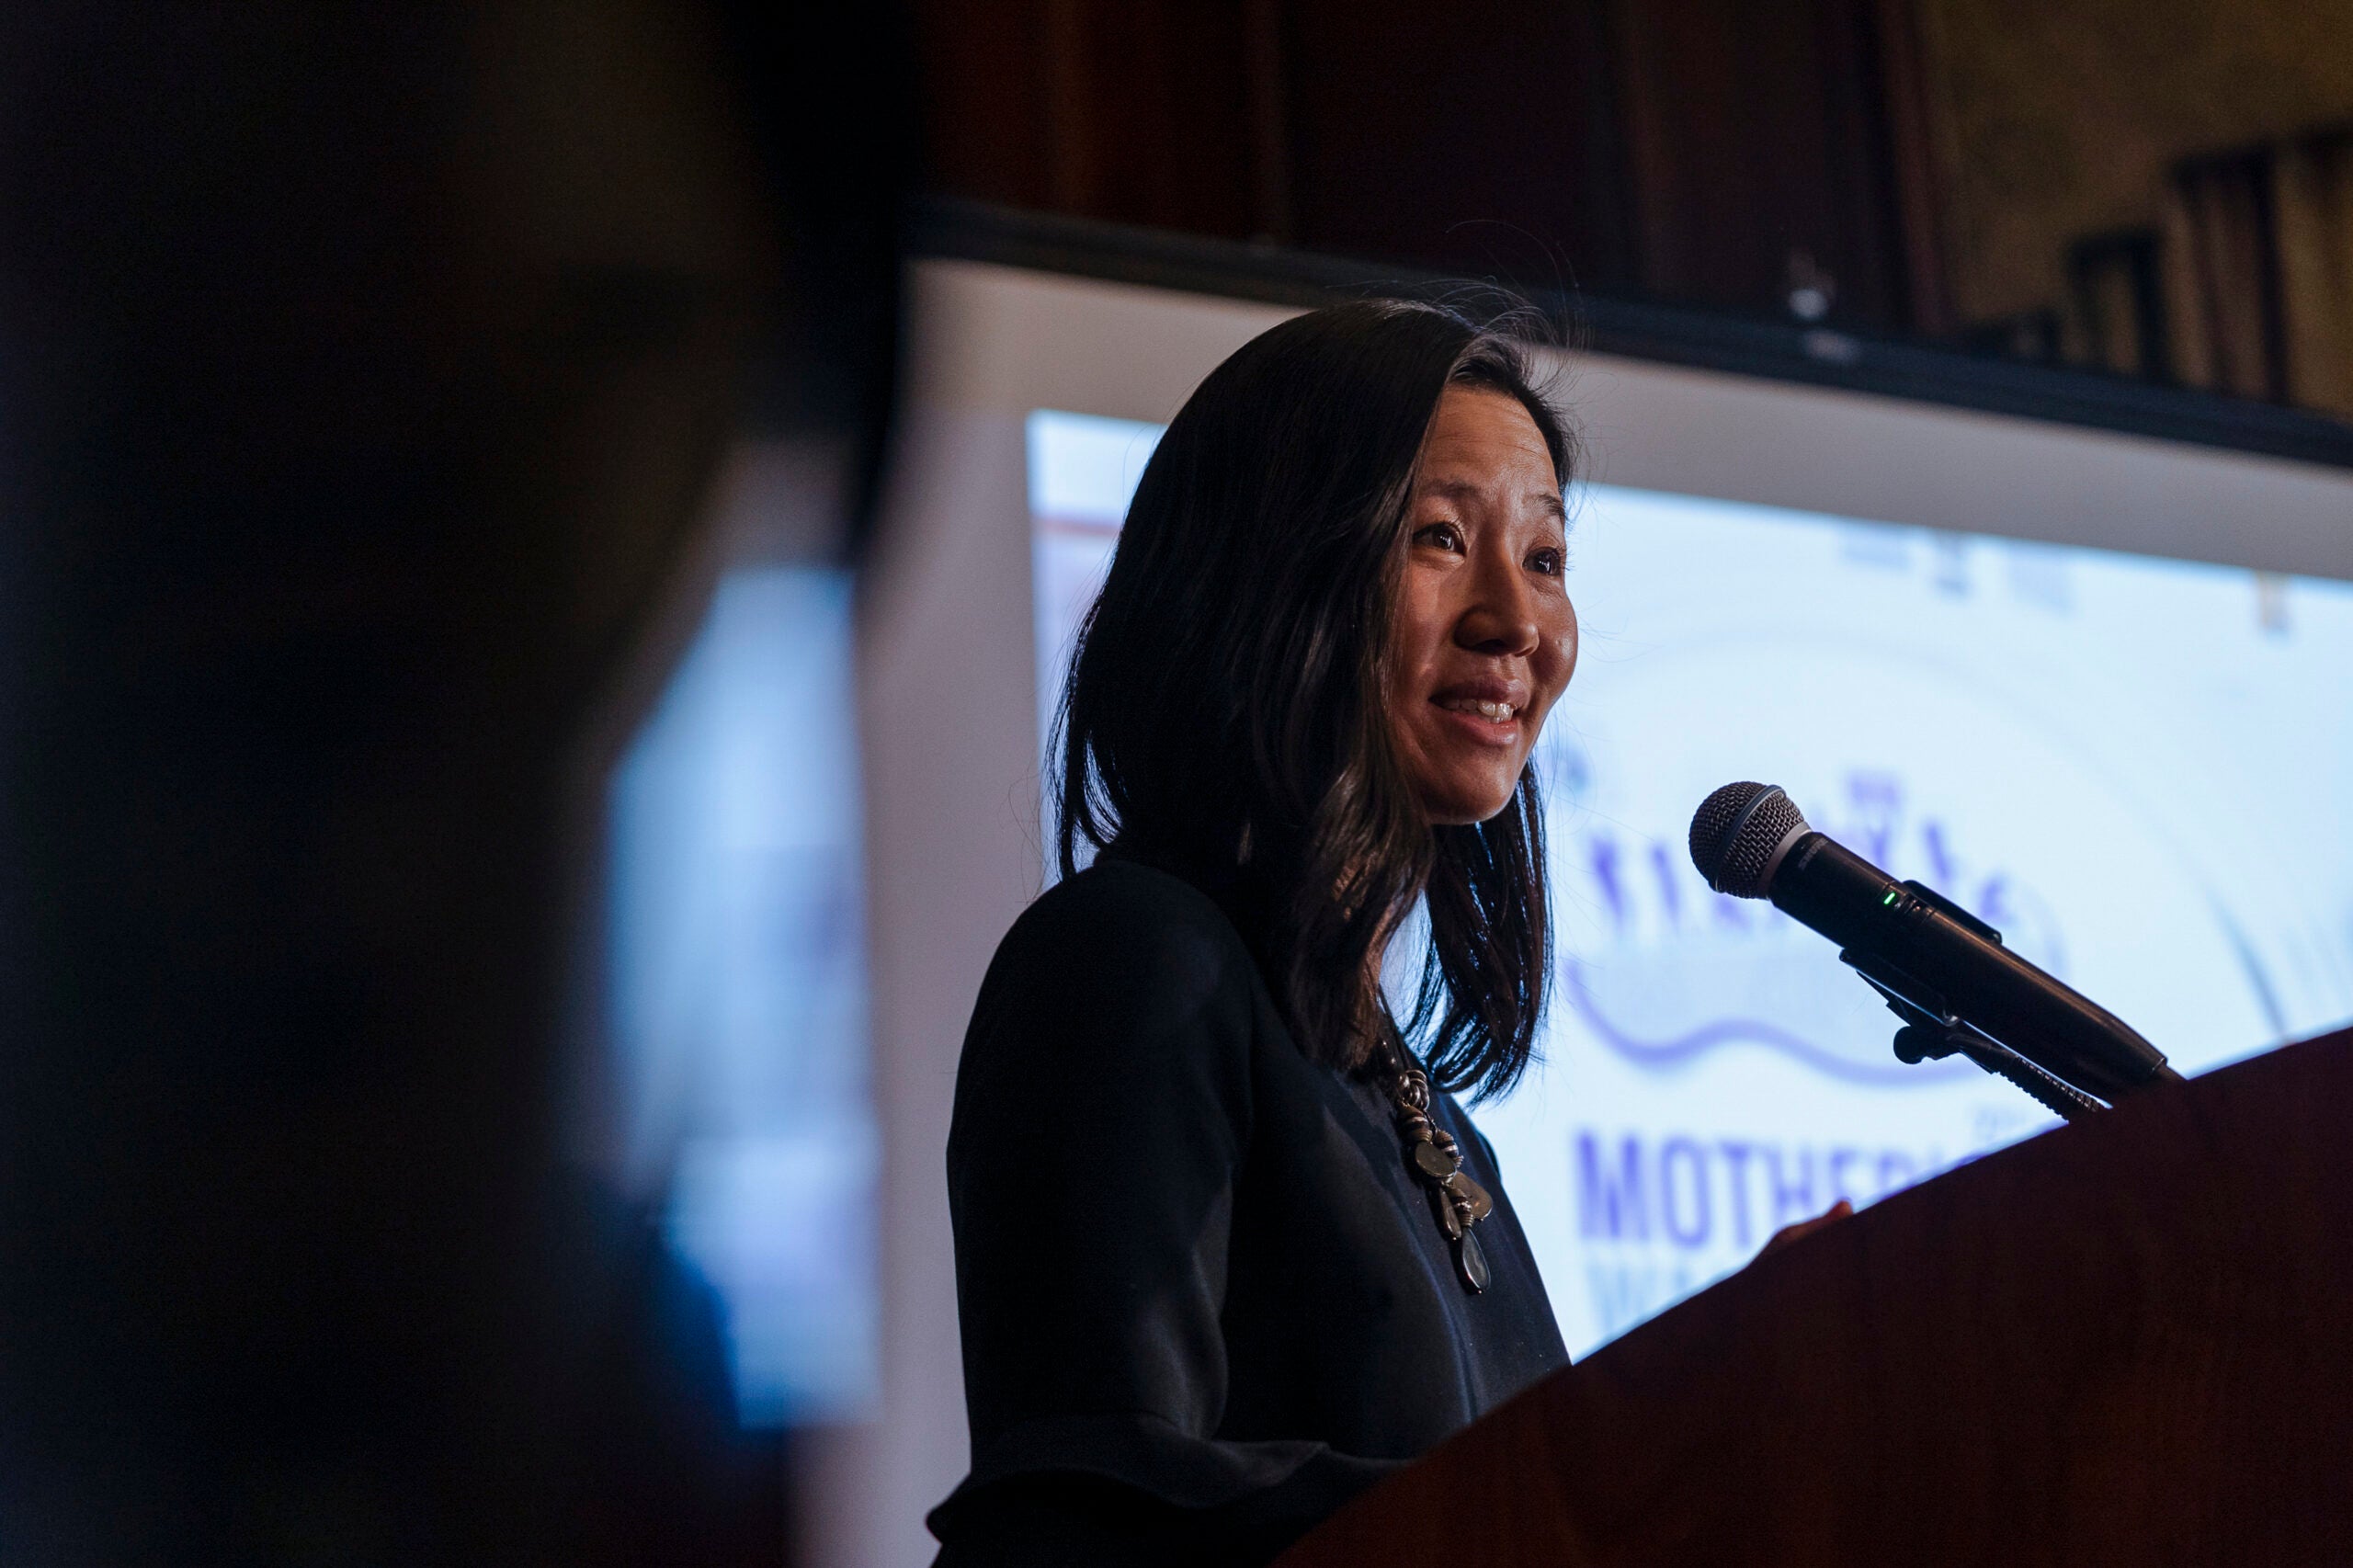 Boston Mayor Michelle Wu speaks at the Hampshire Center in Boston, on March 29, 2023.